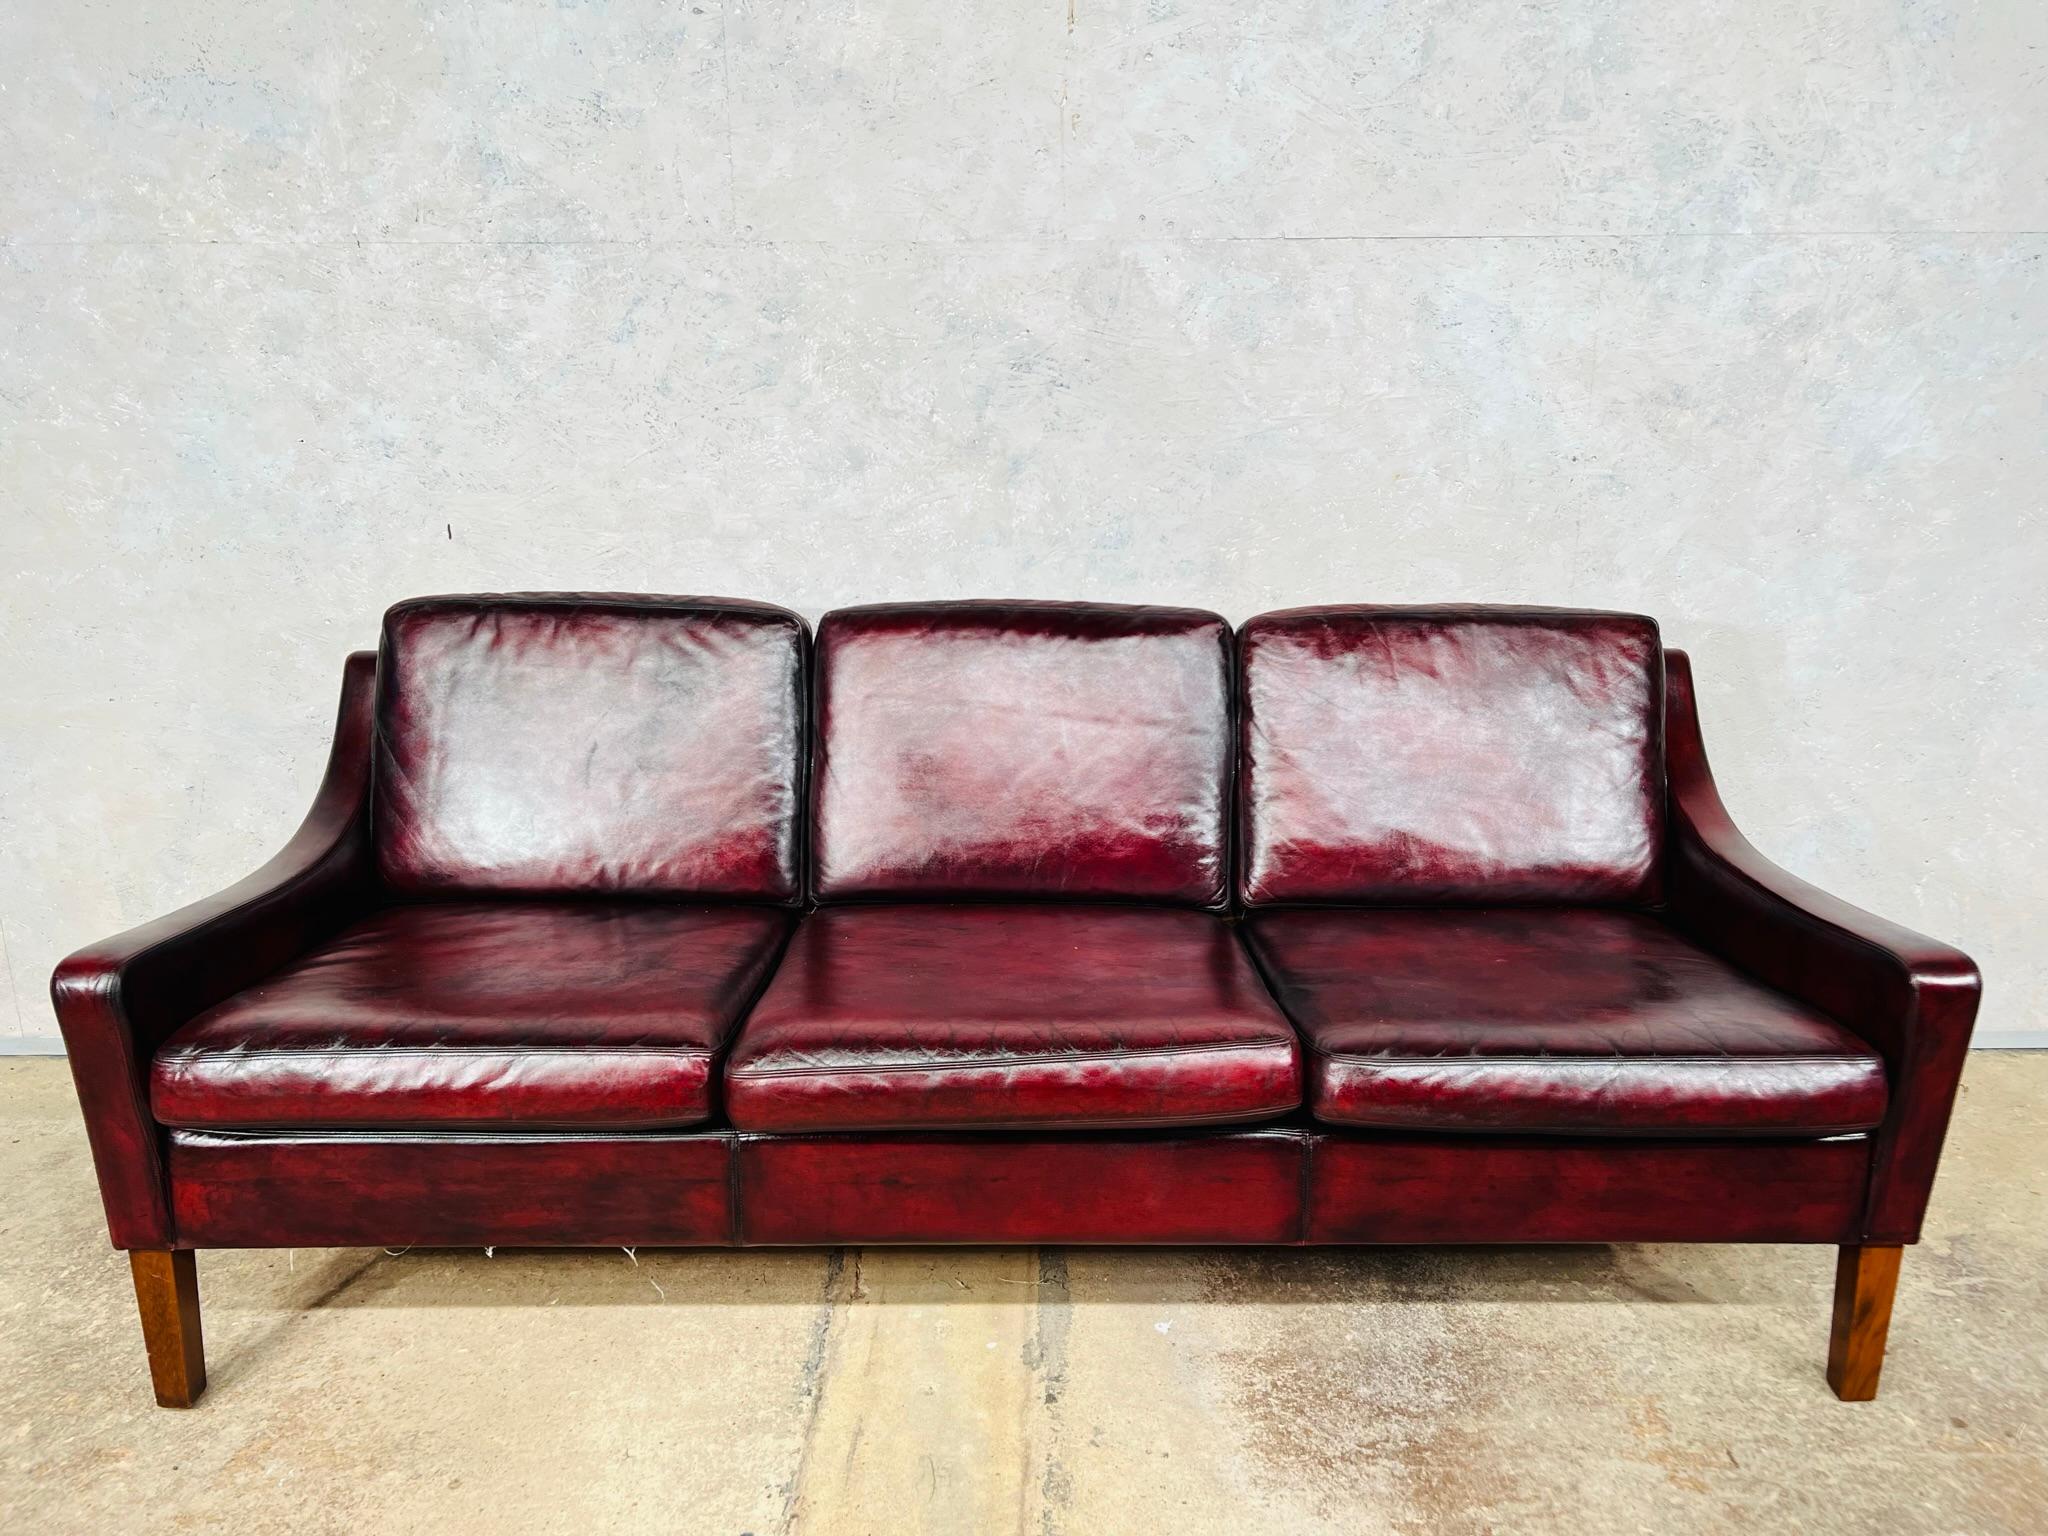 A Vintage Danish 1970s three seater leather sofa.

A compact Three seater, great design and shape, with a fantastic hand dyed patinated deep red color, the leather has a lovely patina and finish.





